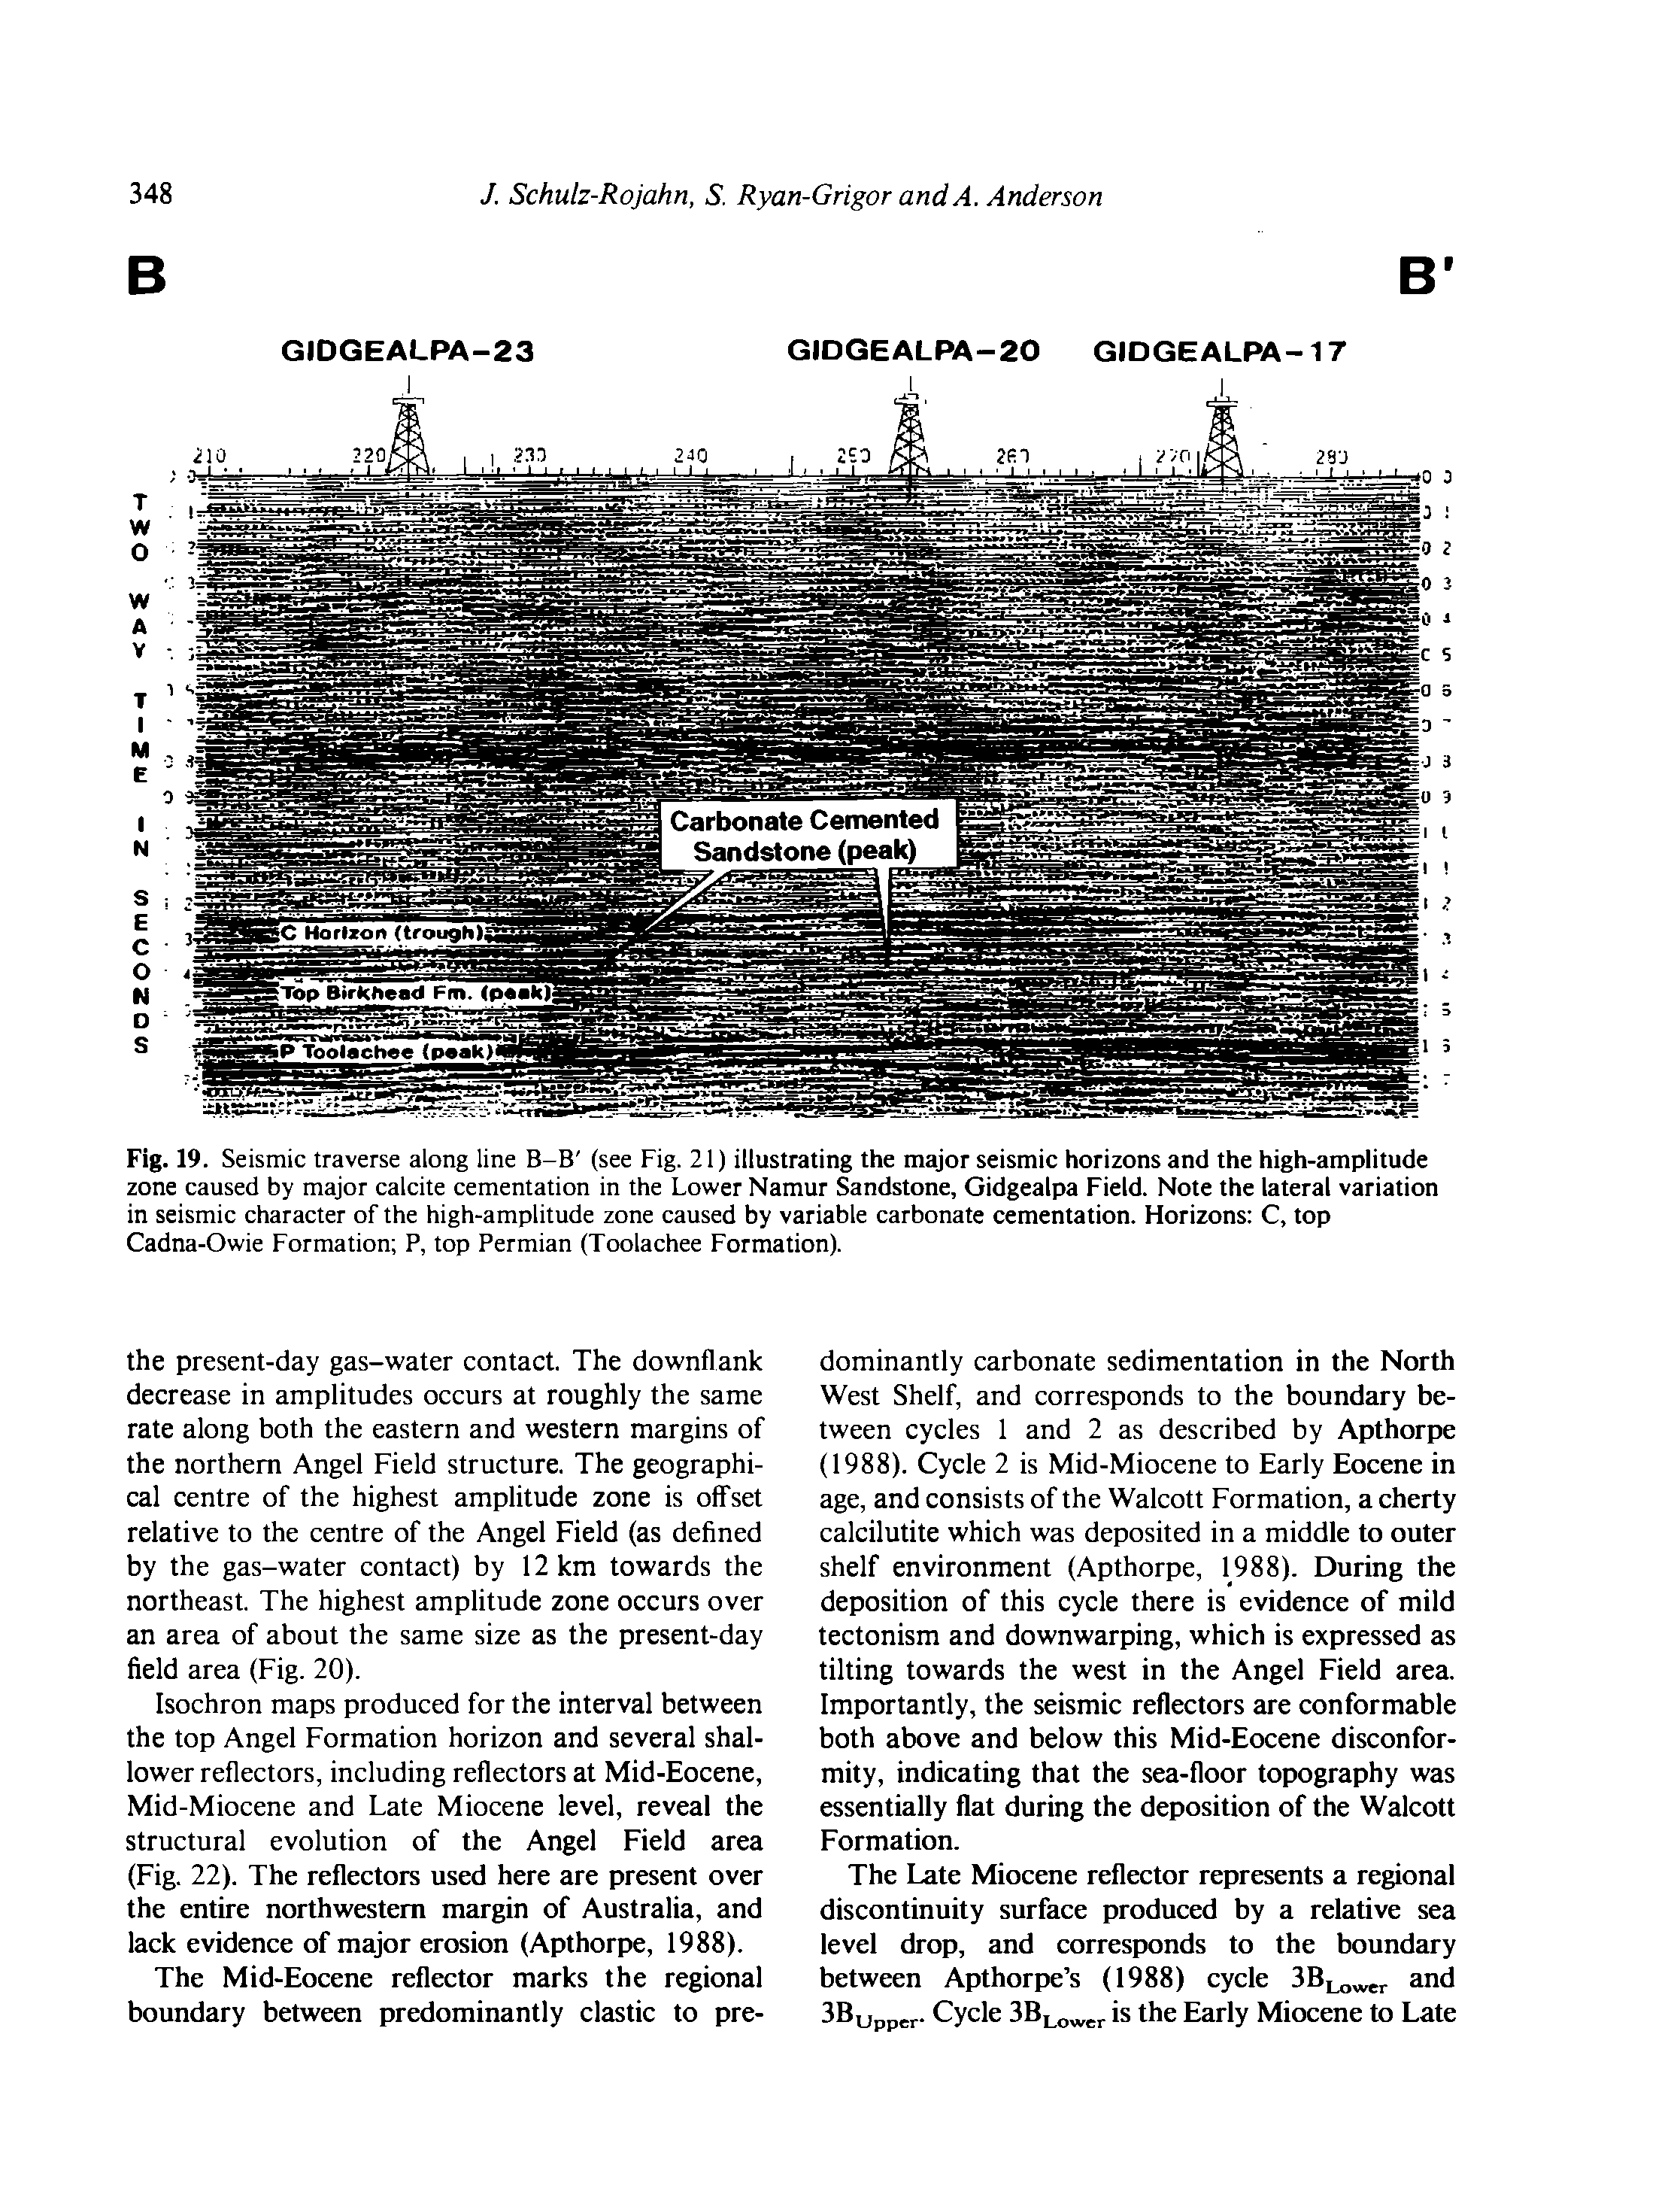 Fig. 19. Seismic traverse along line B-B (see Fig. 21) illustrating the major seismic horizons and the high-amplitude zone caused by major calcite cementation in the Lower Namur Sandstone, Gidgealpa Field. Note the lateral variation in seismic character of the high-amplitude zone caused by variable carbonate cementation. Horizons C, top Cadna-Owie Formation P, top Permian (Toolachee Formation).